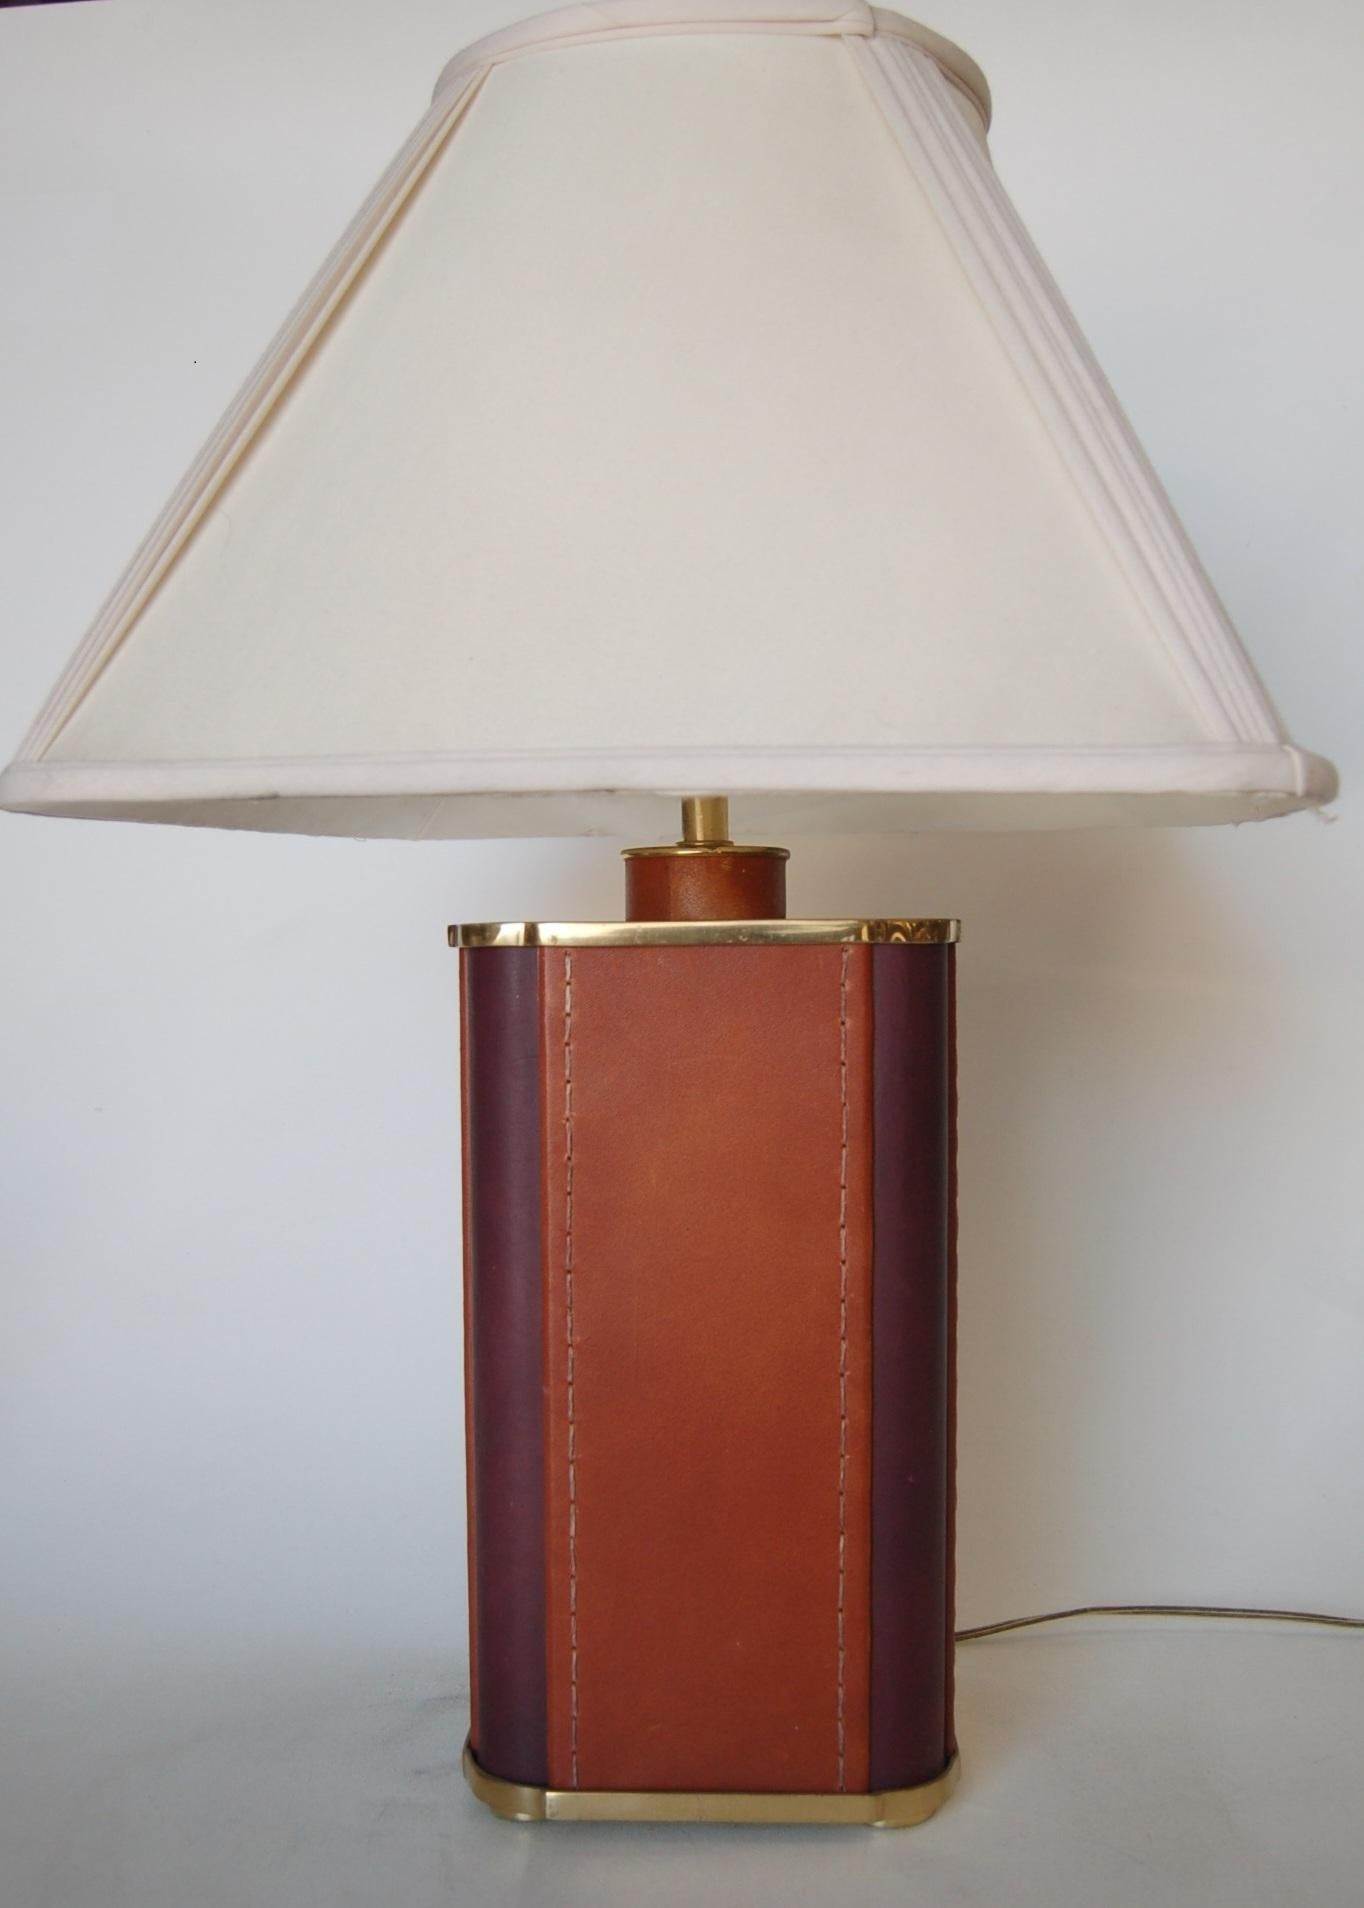 Large two-toned rust and wine leather square table lamp with gold trim. Measures: 8